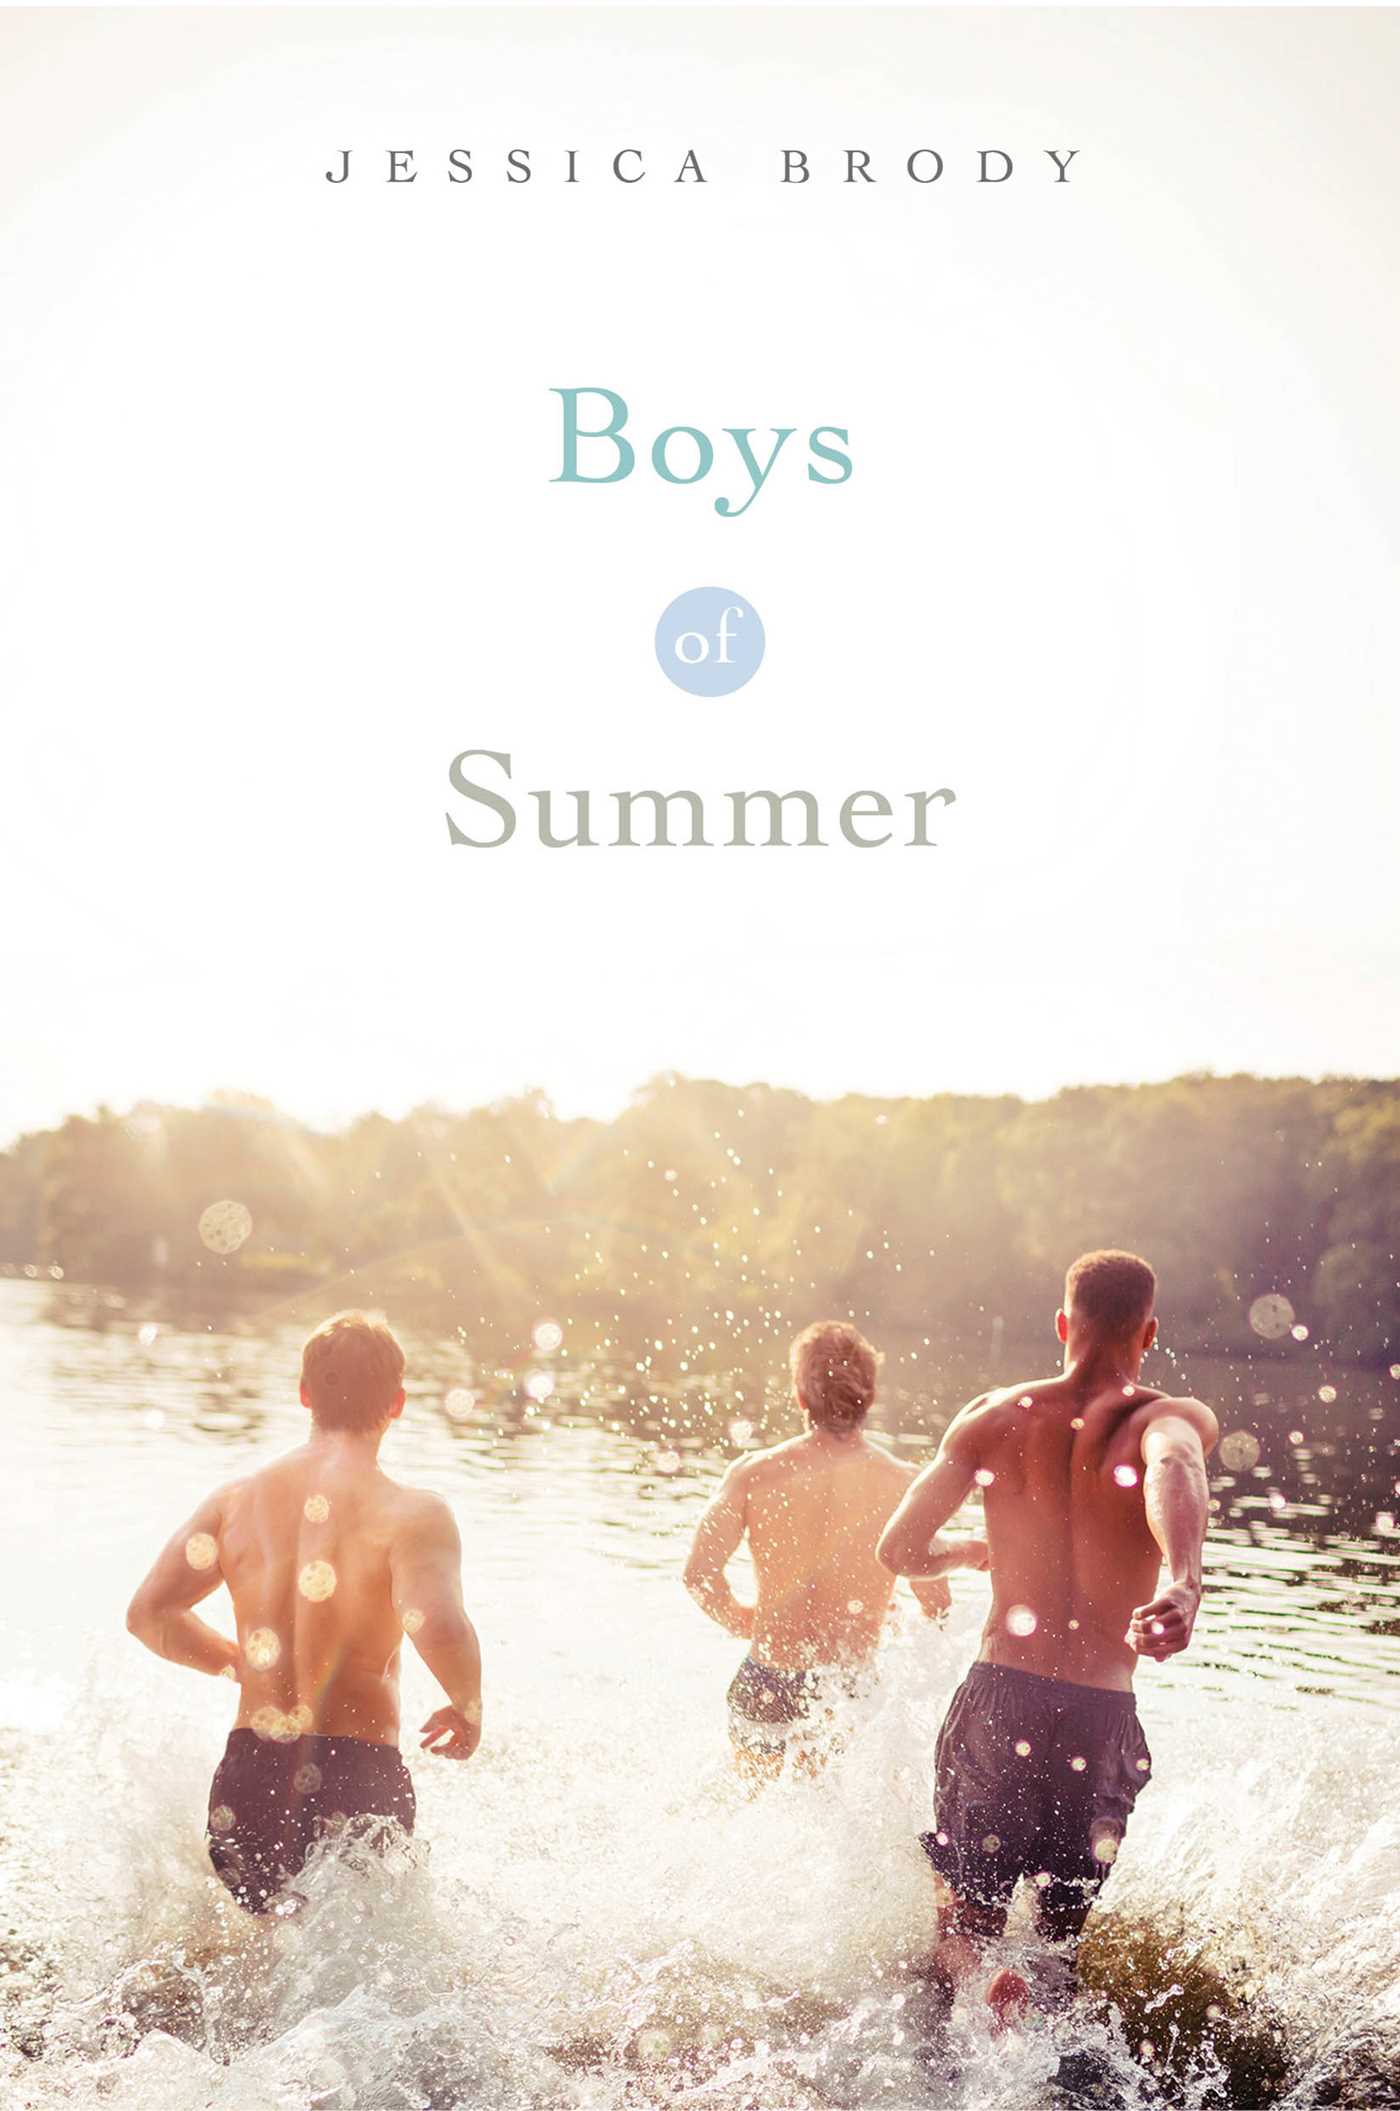 Read the first 16 chapters ofThe Boys of Summer by Jessica Brody!